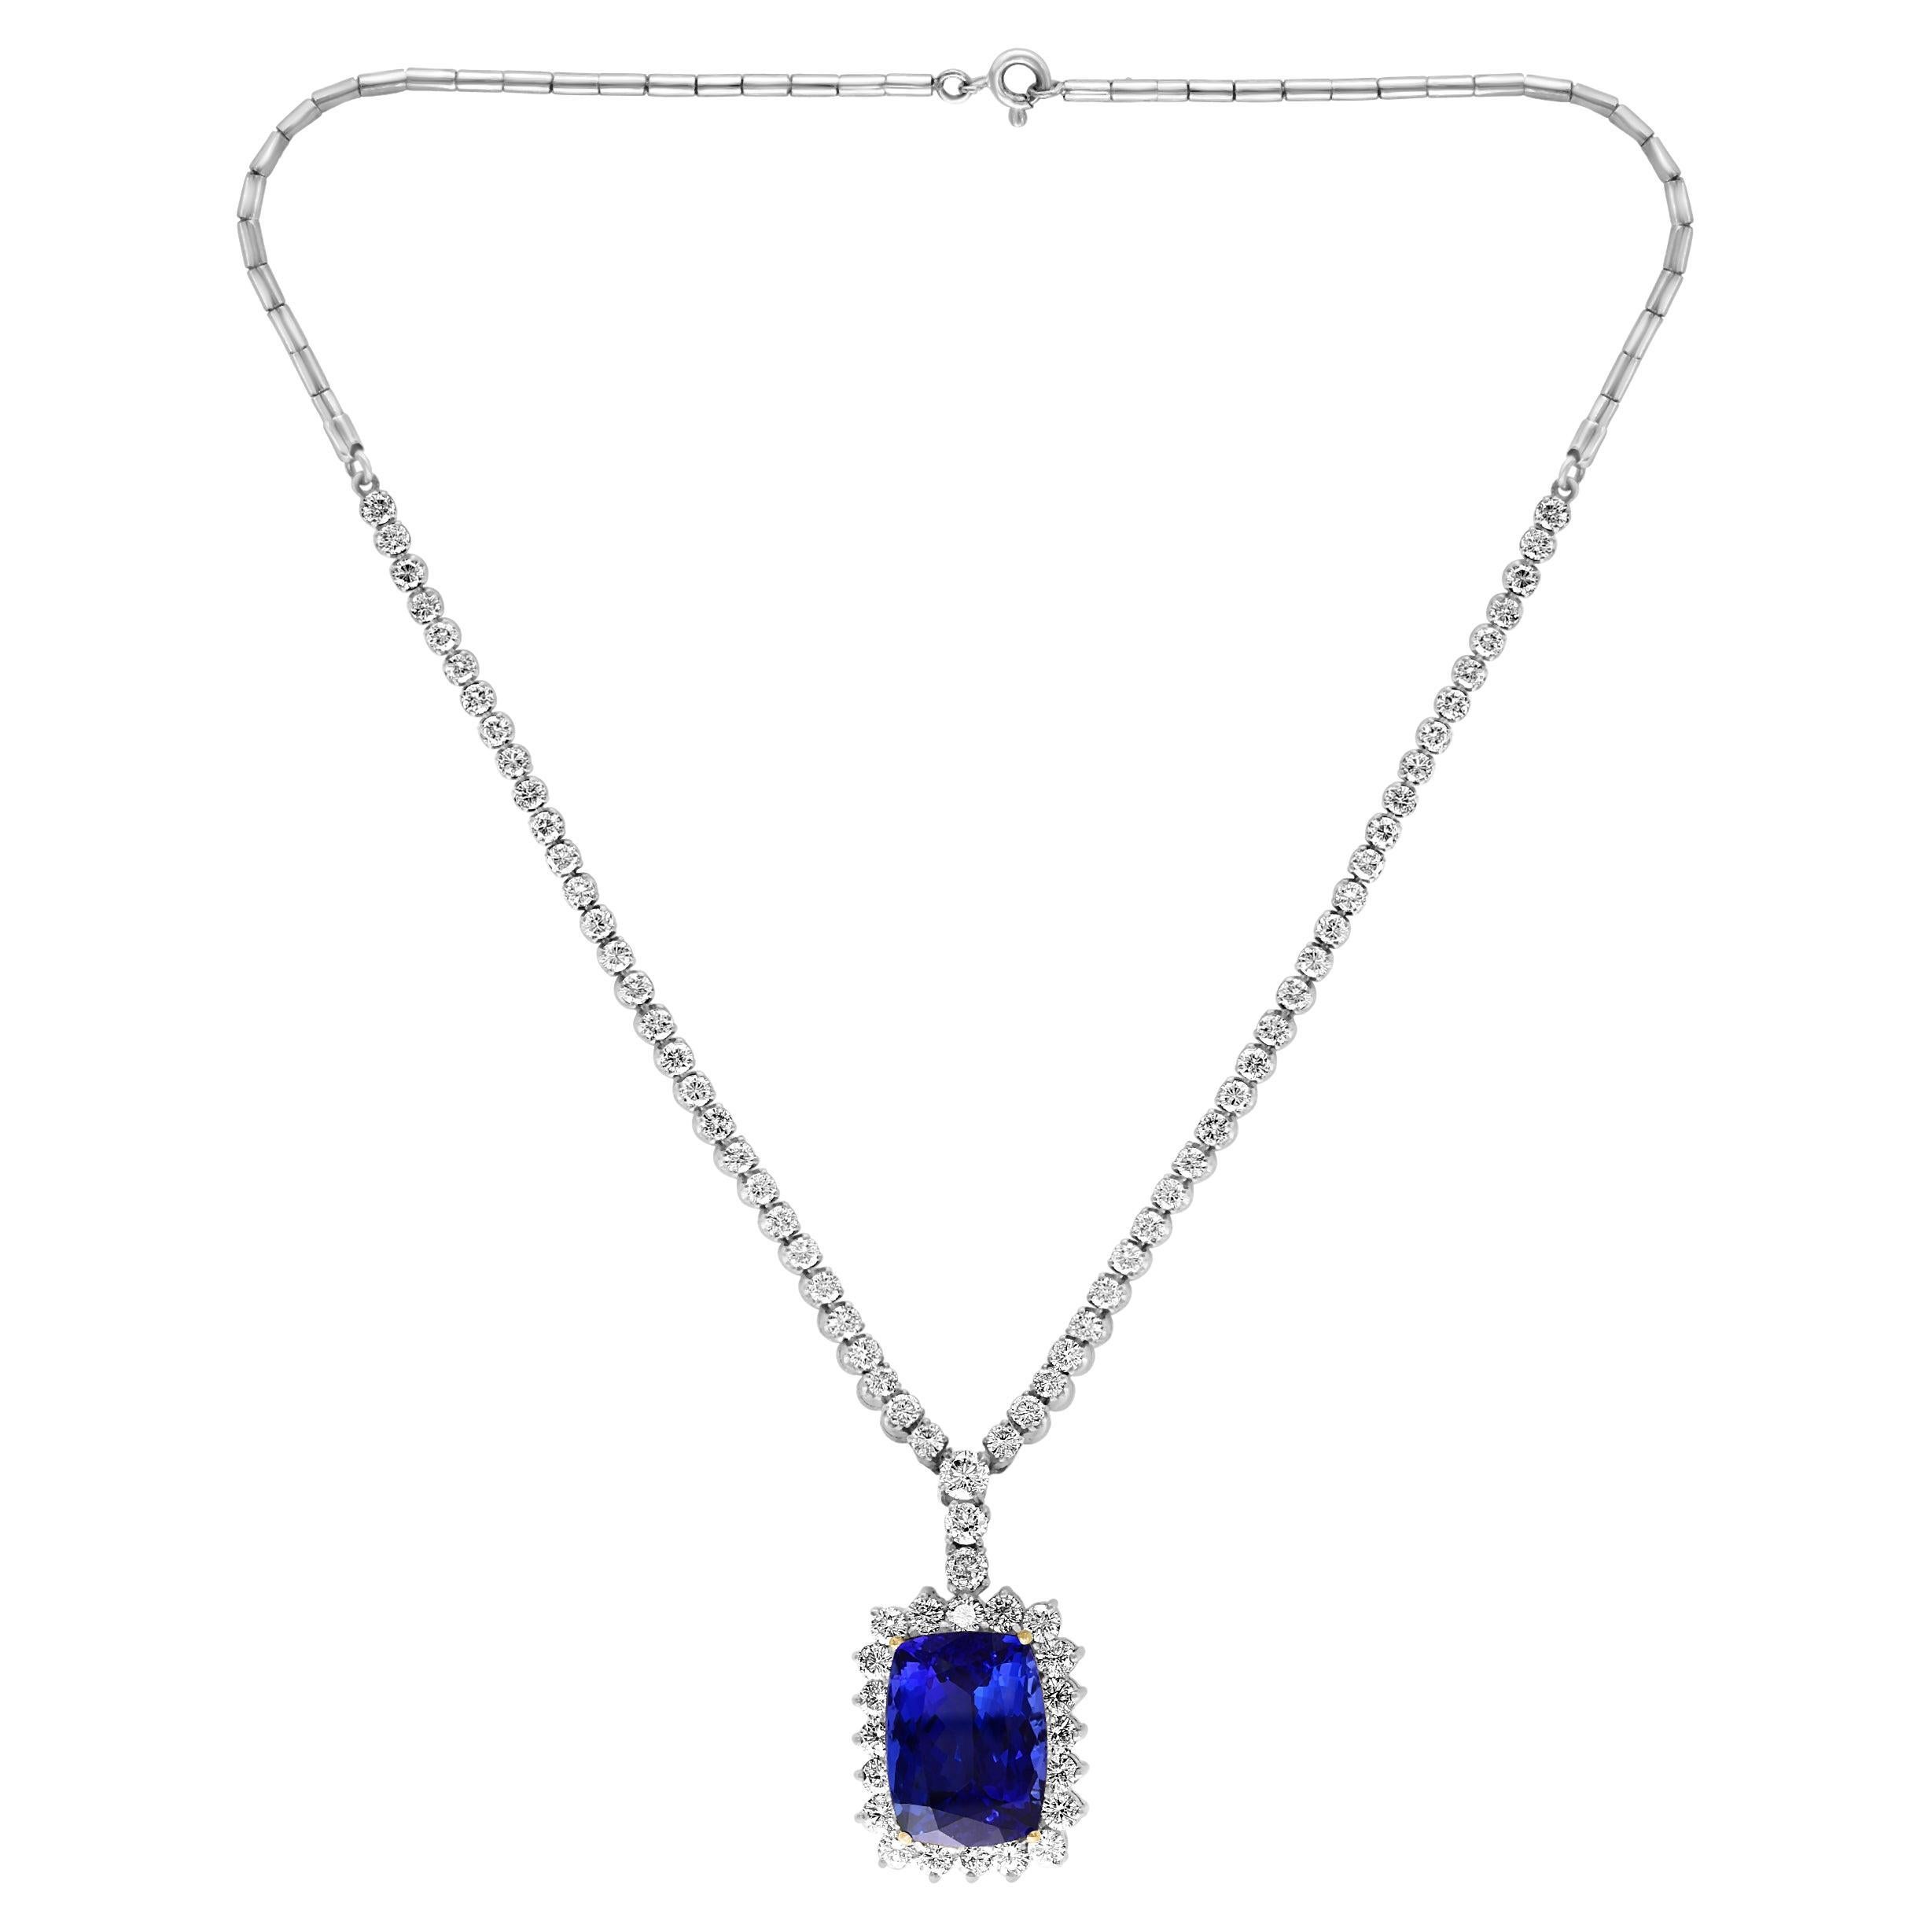 This extraordinary, 21 carat tanzanite is truly an extraordinary gemstone. There are  total  of approximately 9.5 carats of shimmering white diamonds, this brilliant cushion-cut gem exhibits the rich Violetish-blue color for which these stones are